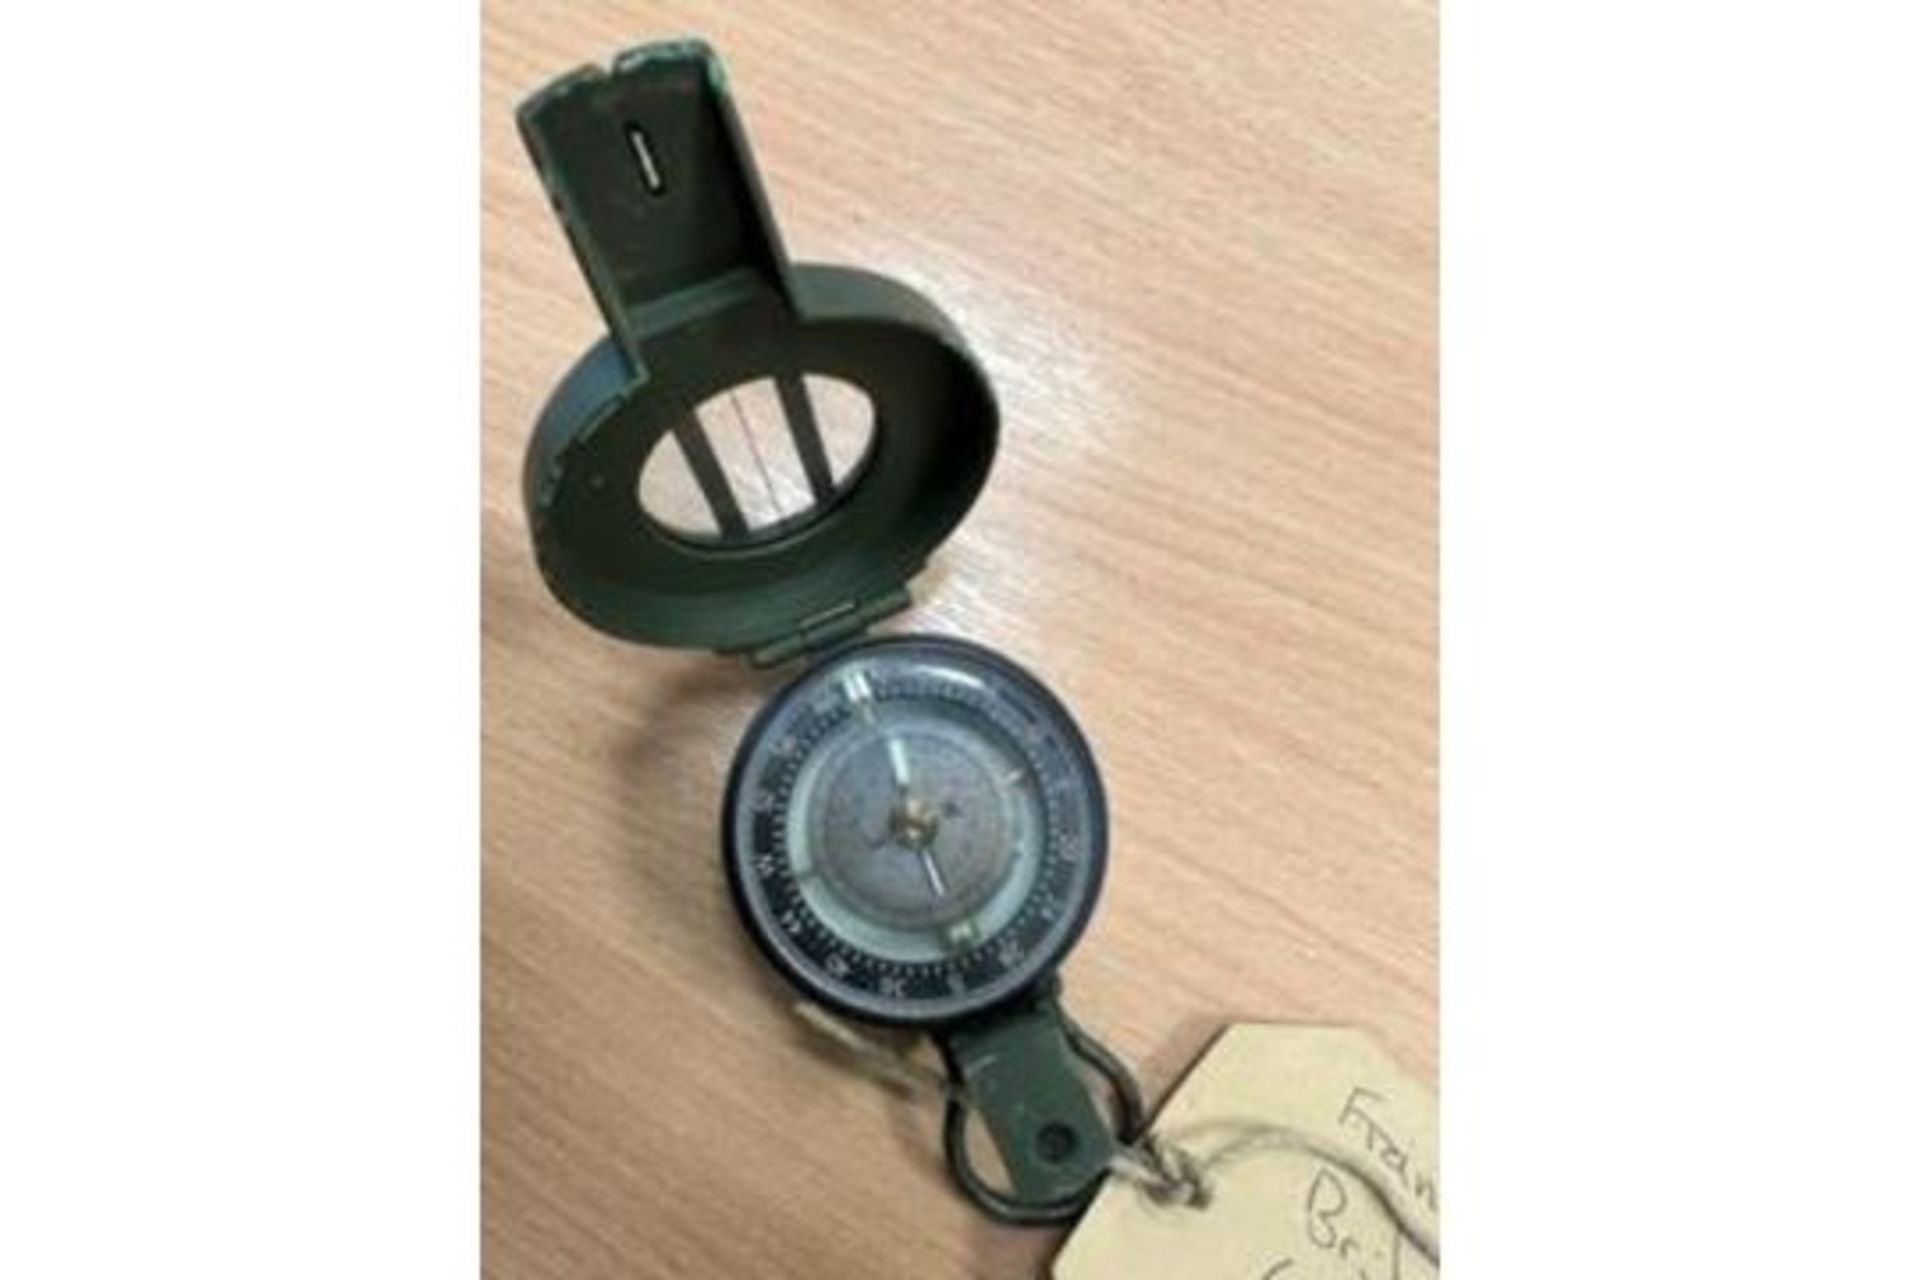 FRANCIS BAKER M88 BRITISH ARMY PRISMATIC COMPASS IN MILS NATO MARKS - Image 2 of 5